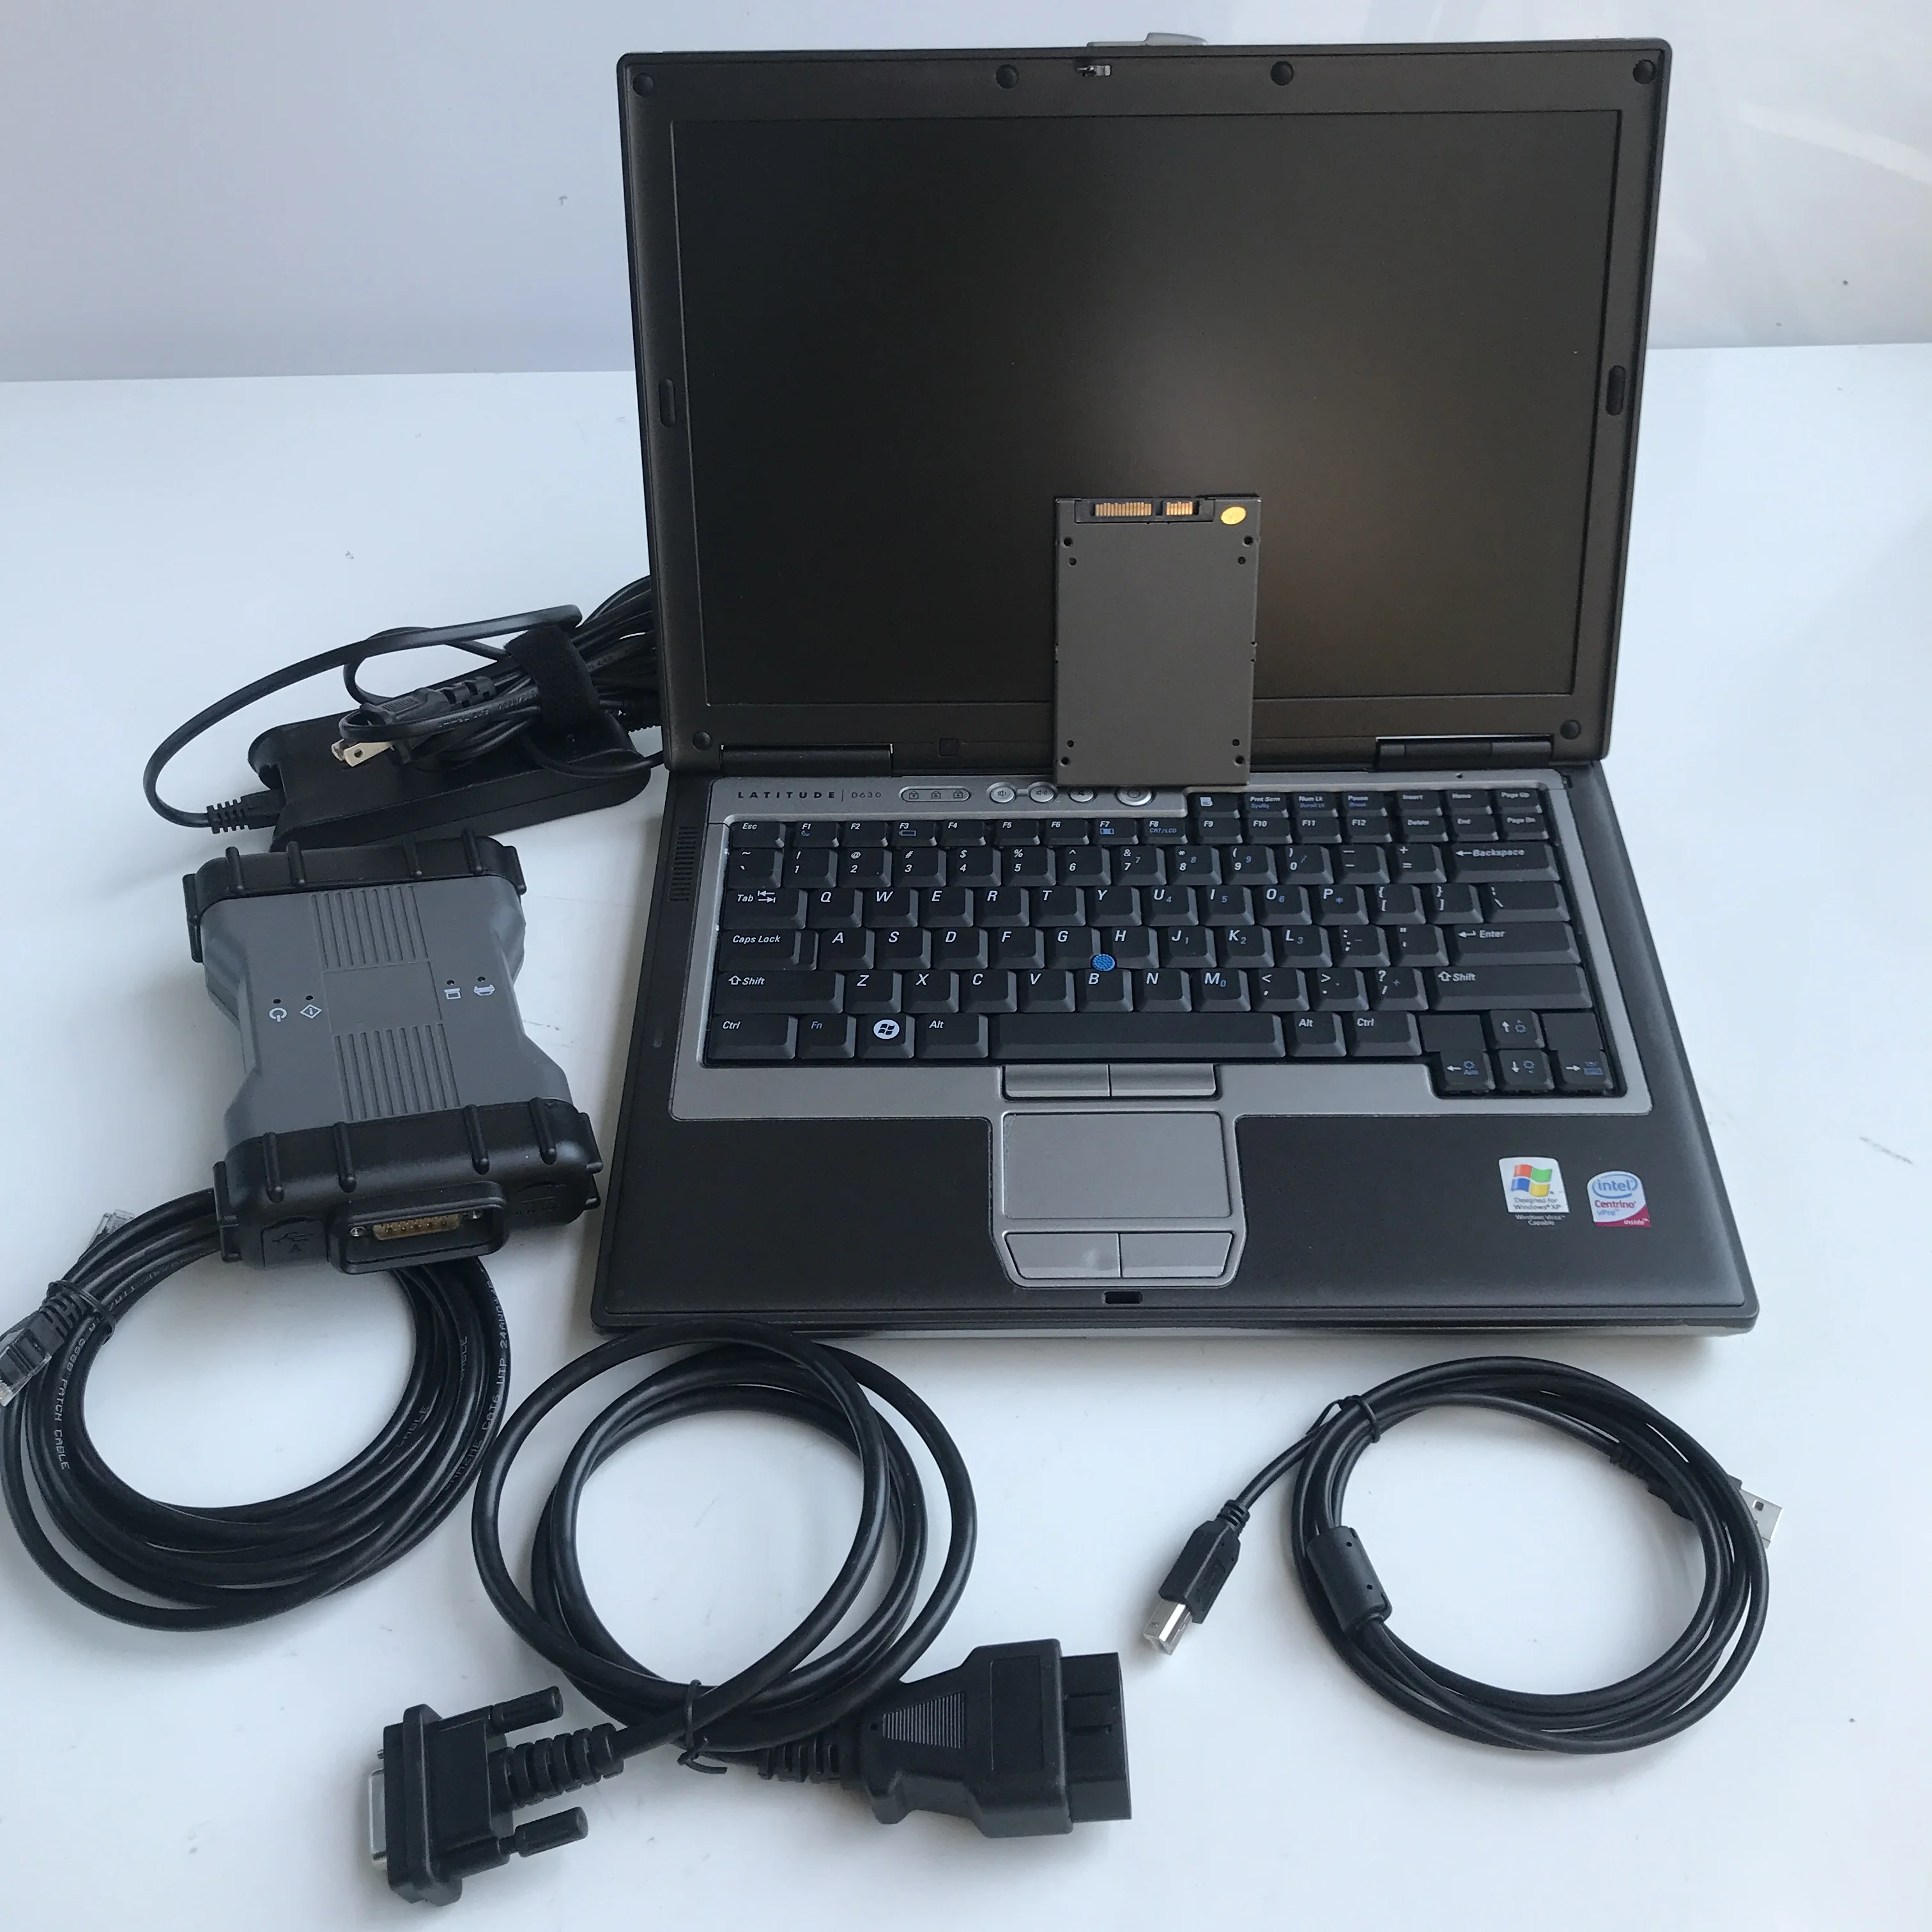 

2021.03v mb c6 sd connect vci CAN DOIP Protocol star diagnosis ssd software newest laptop D630 ram 4G ready to work